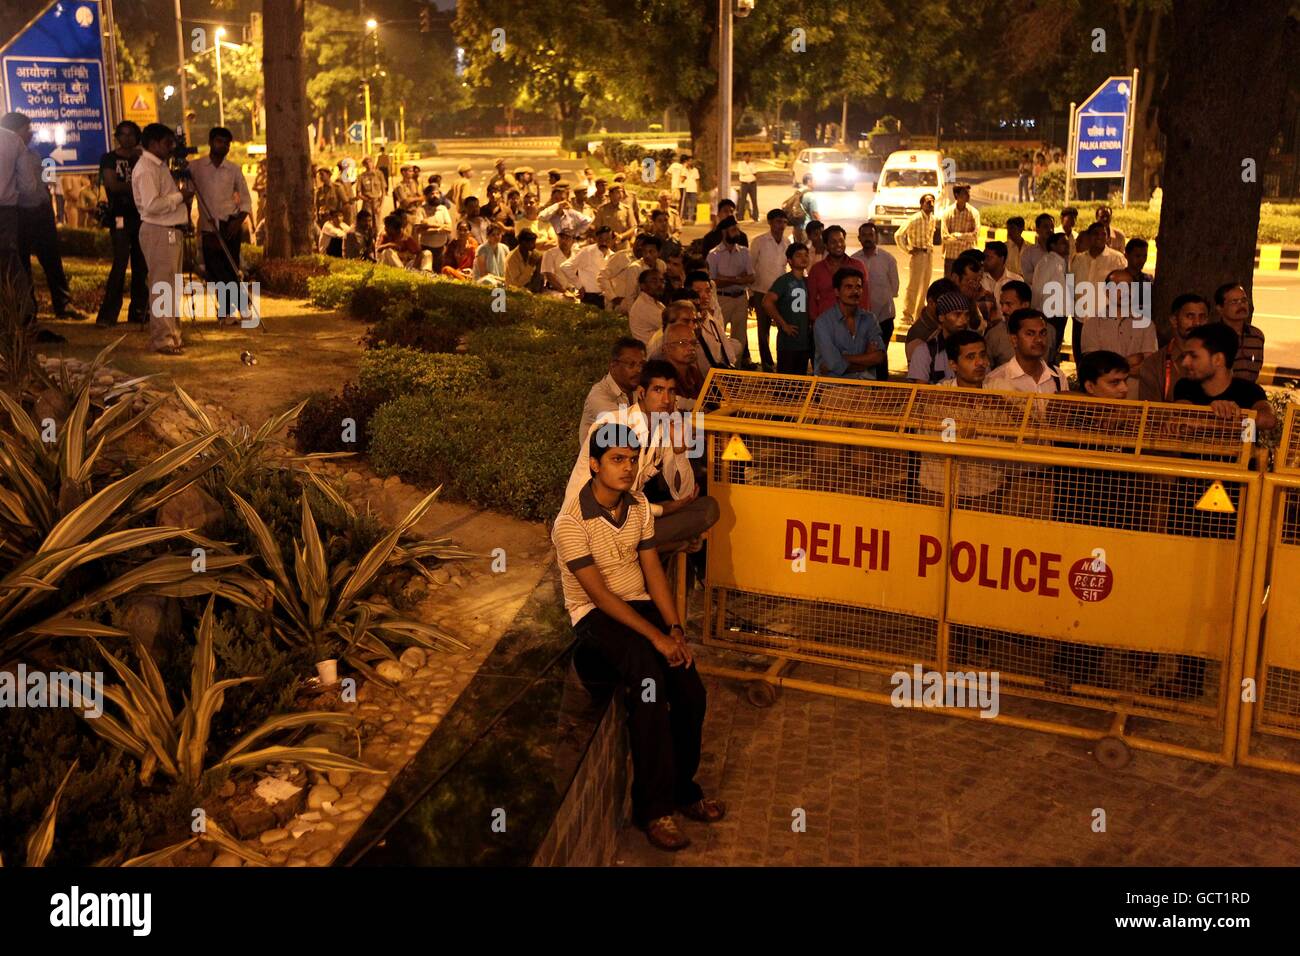 People are held behind a police barrier as they watch the opening ceremony on a giant screen as it unfolds to officially open the 2010 Commonwealth Games at the organising committee building in central New Delhi, India Stock Photo